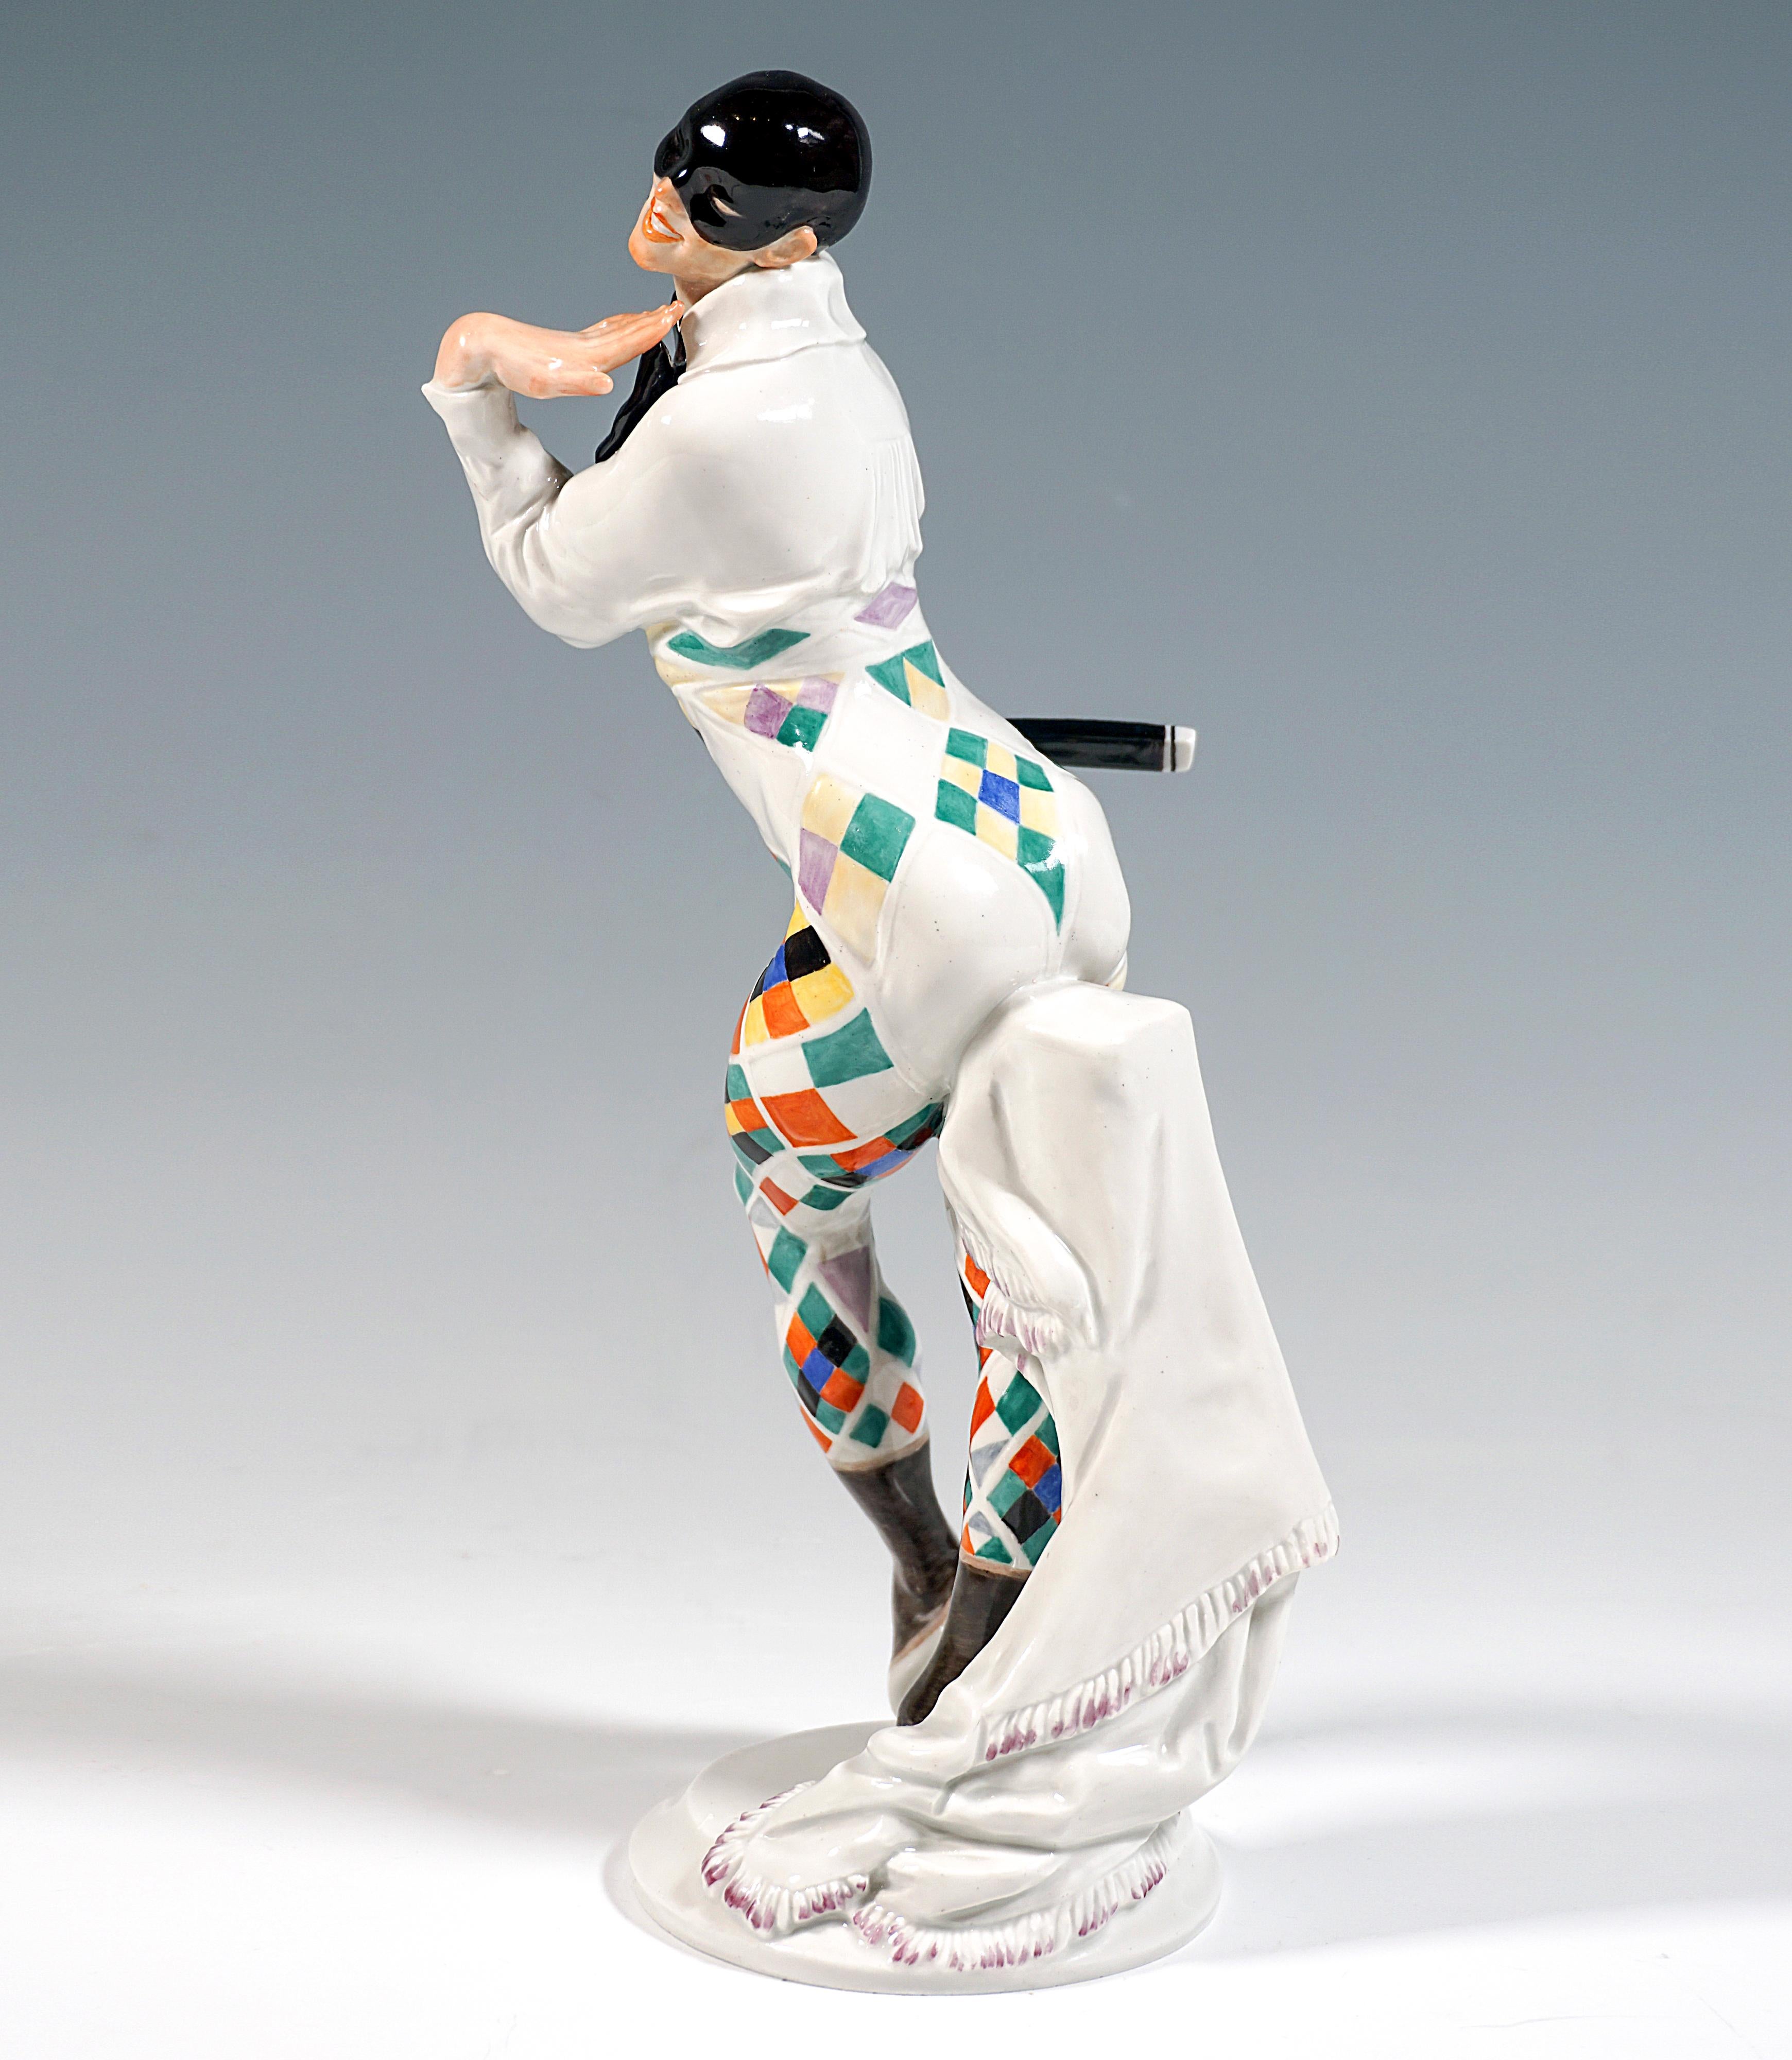 Finest Meissen Porcelain Figurine:
Posing dancer, depicting Vaclav Nijinsky as a bajazzo (or harlequin), with his upper body leaning slightly forward, standing on his right leg, slightly raising his left with his foot extended downward, turning his